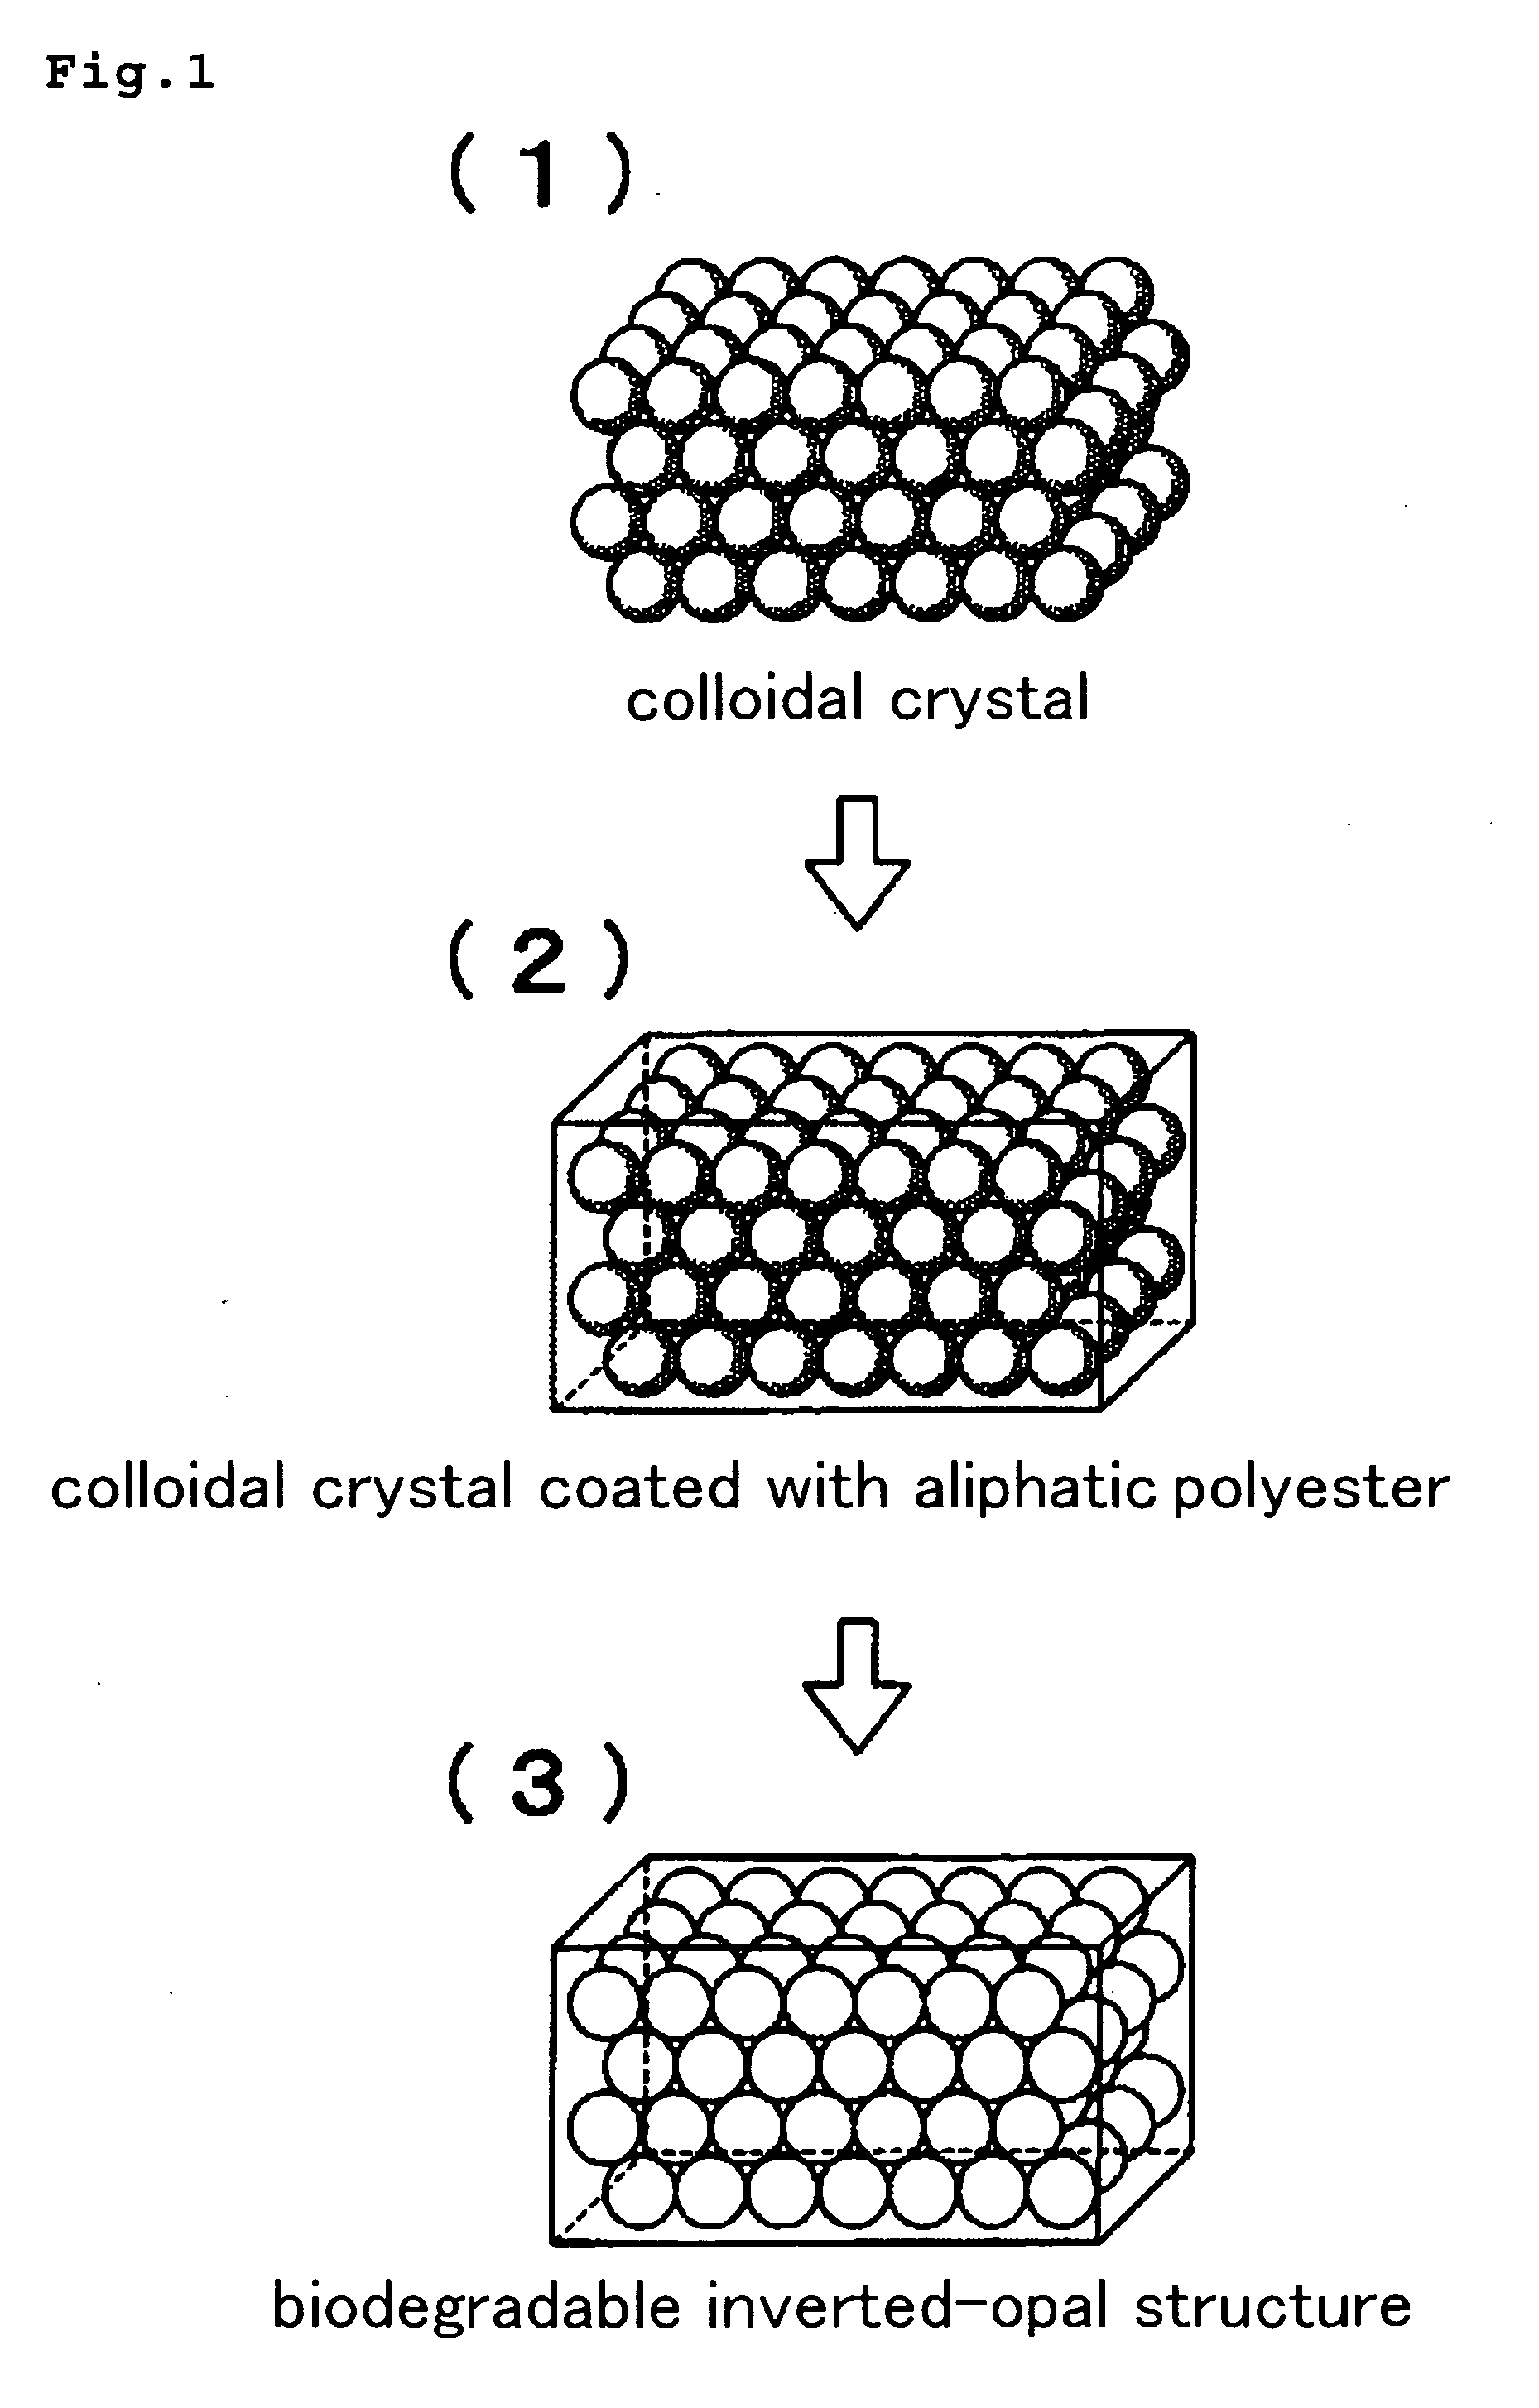 Biodegradable Inverted-Opal Structure, Method for Manufacturing and Using the Same, and Medical Implant Comprising the Biodegradable Inverted-Opal Structure